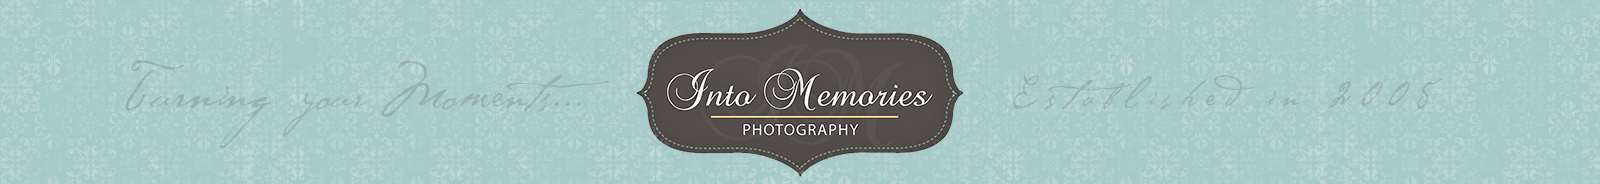 Syracuse Upstate NY Wedding Photography + Portrait Photography with Pam of Into Memories Photography.